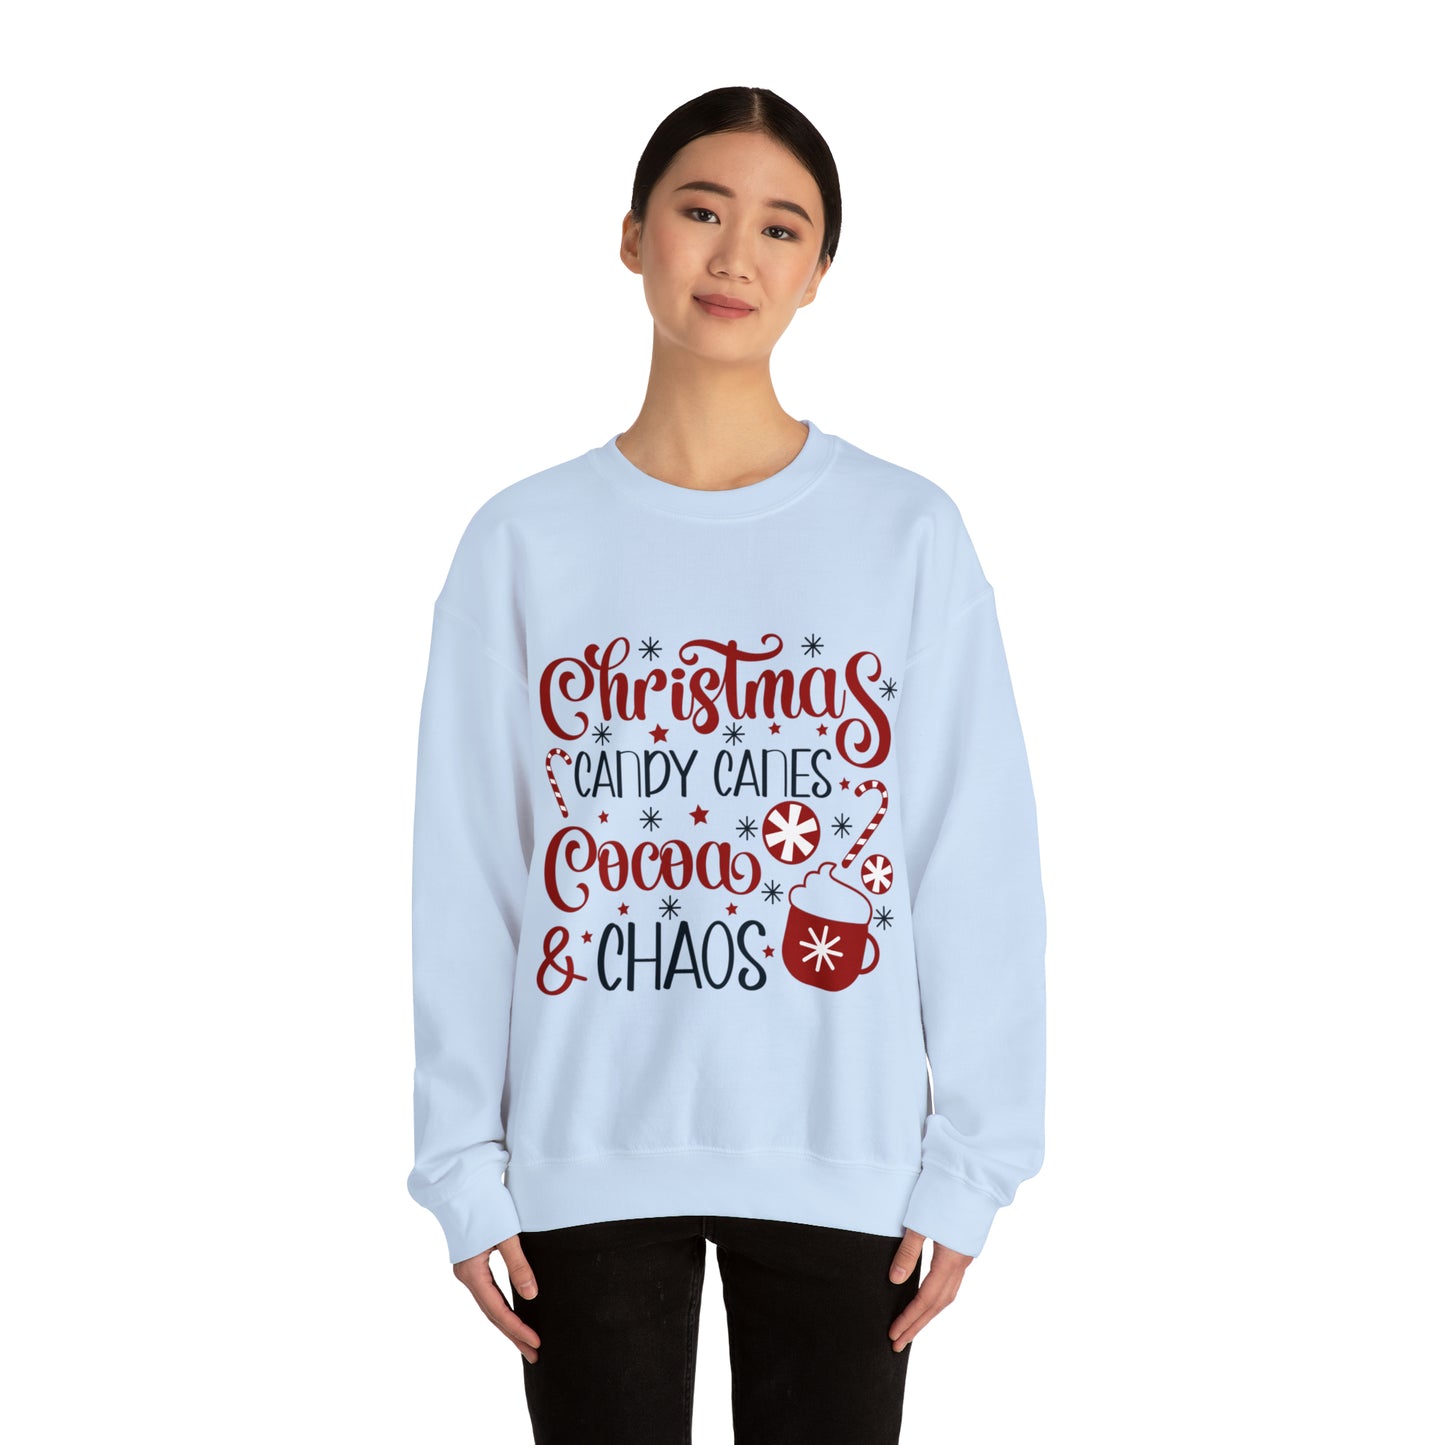 Winter Elegance Unisex Heavy Blend Sweatshirt with Christmas Touch, Quality and Joy Christmas Sweatshirt, Christmas gift, perfect gift